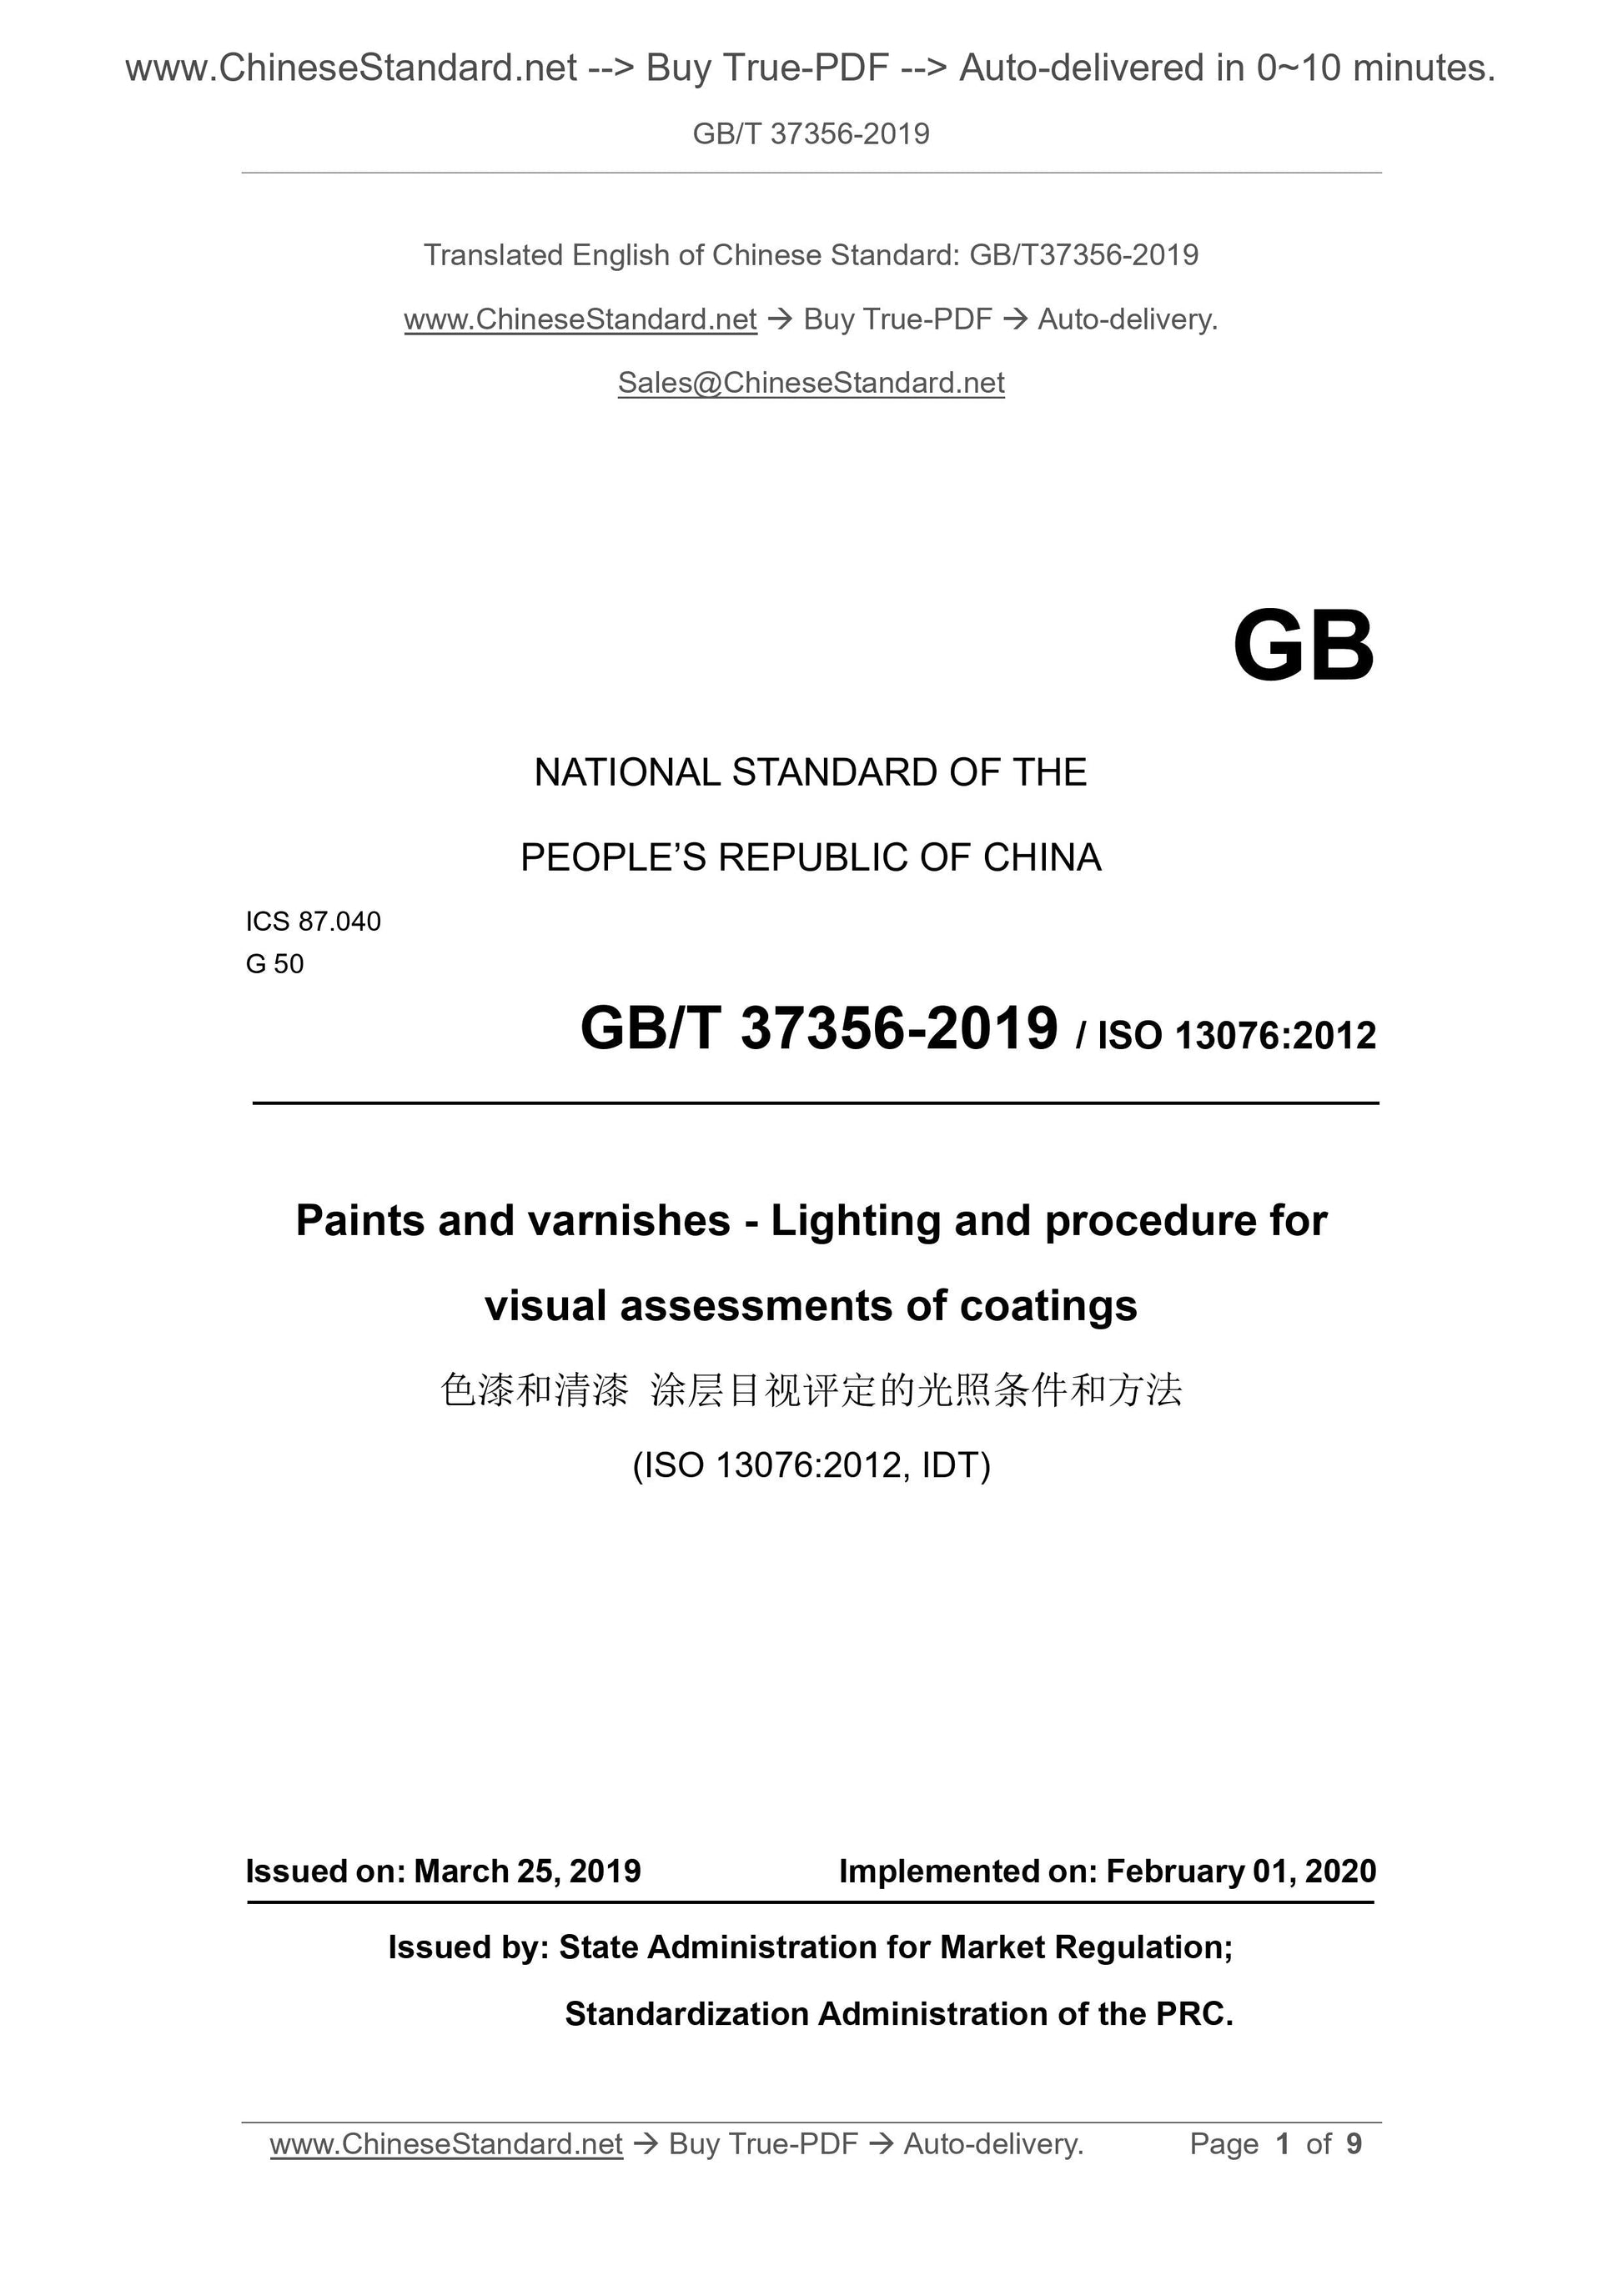 GB/T 37356-2019 Page 1